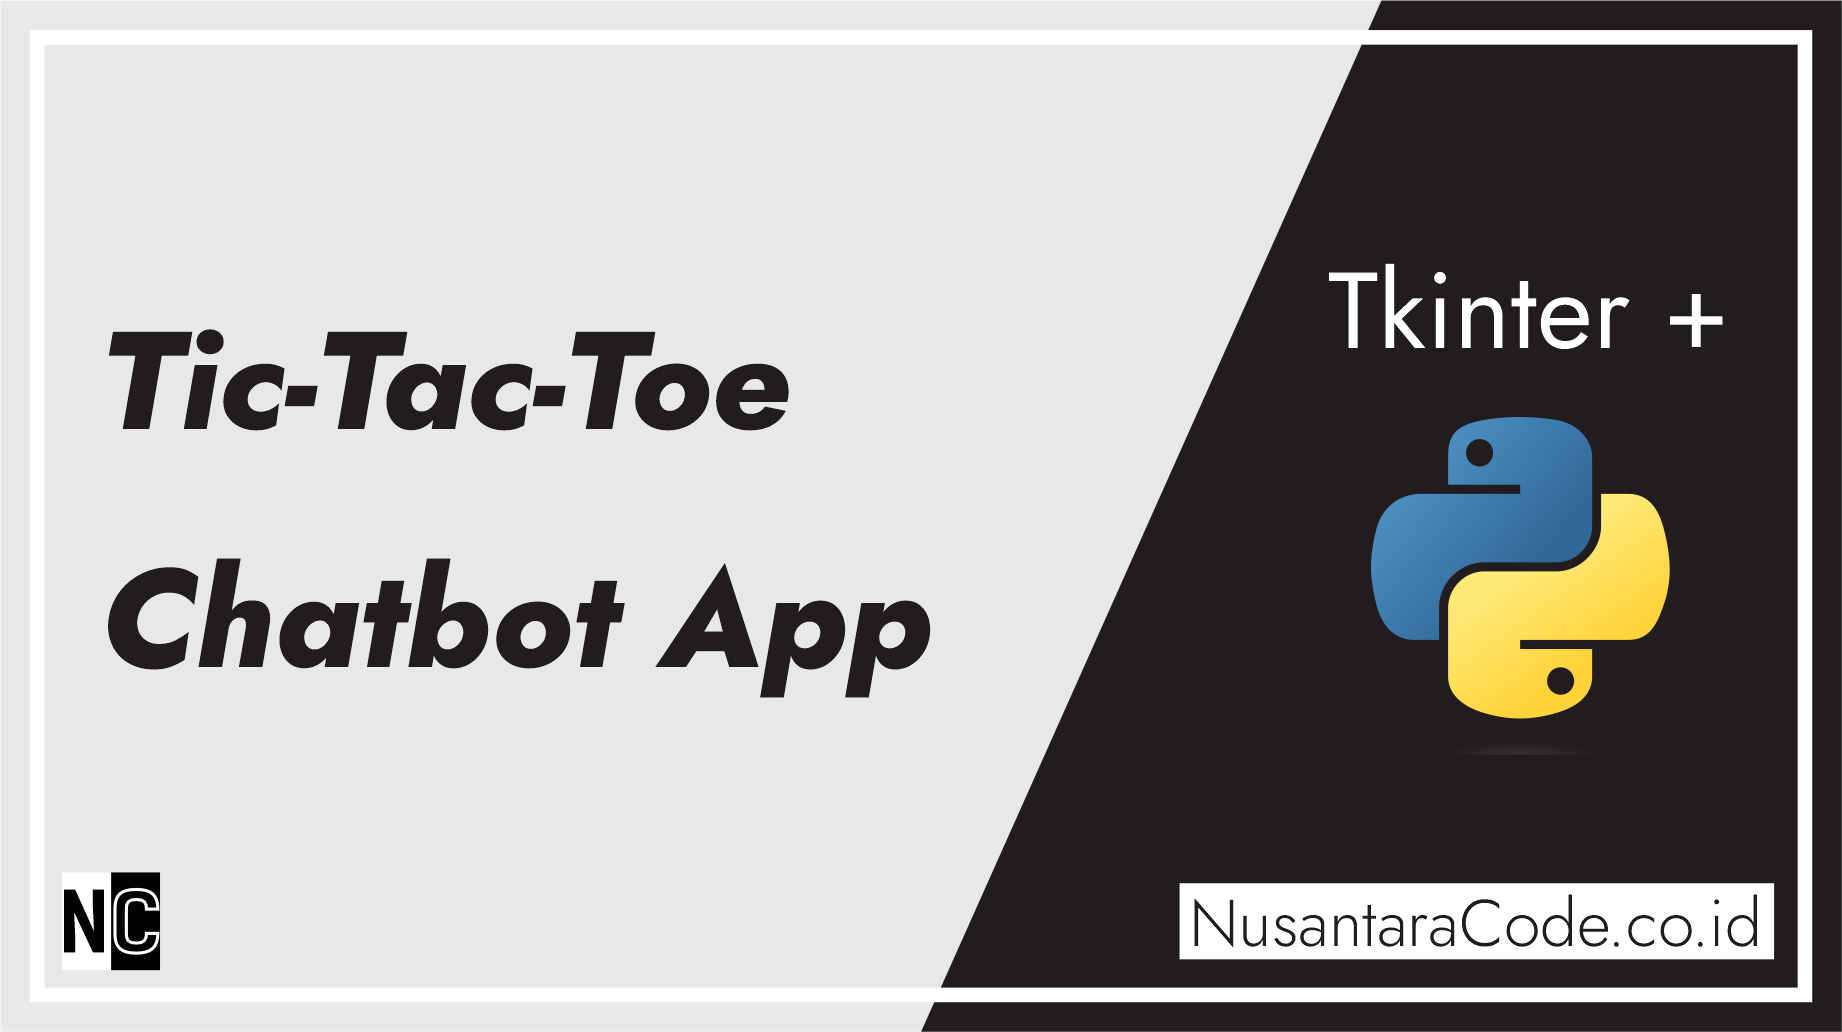 Creating a Tic-Tac-Toe Chatbot App with Python and Tkinter